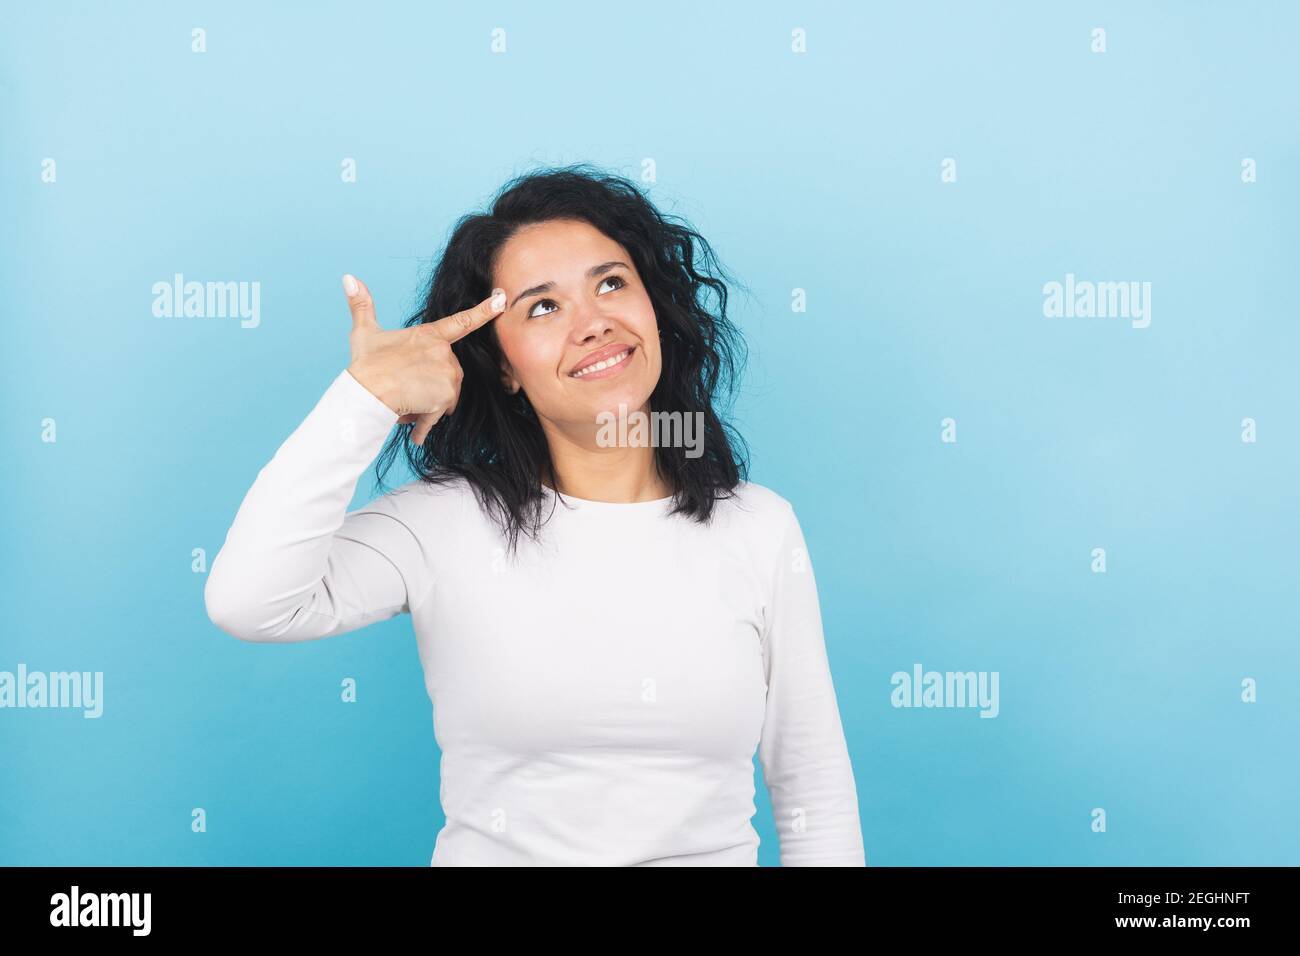 young brunette woman jokingly makes a gun gesture with her hand Stock Photo